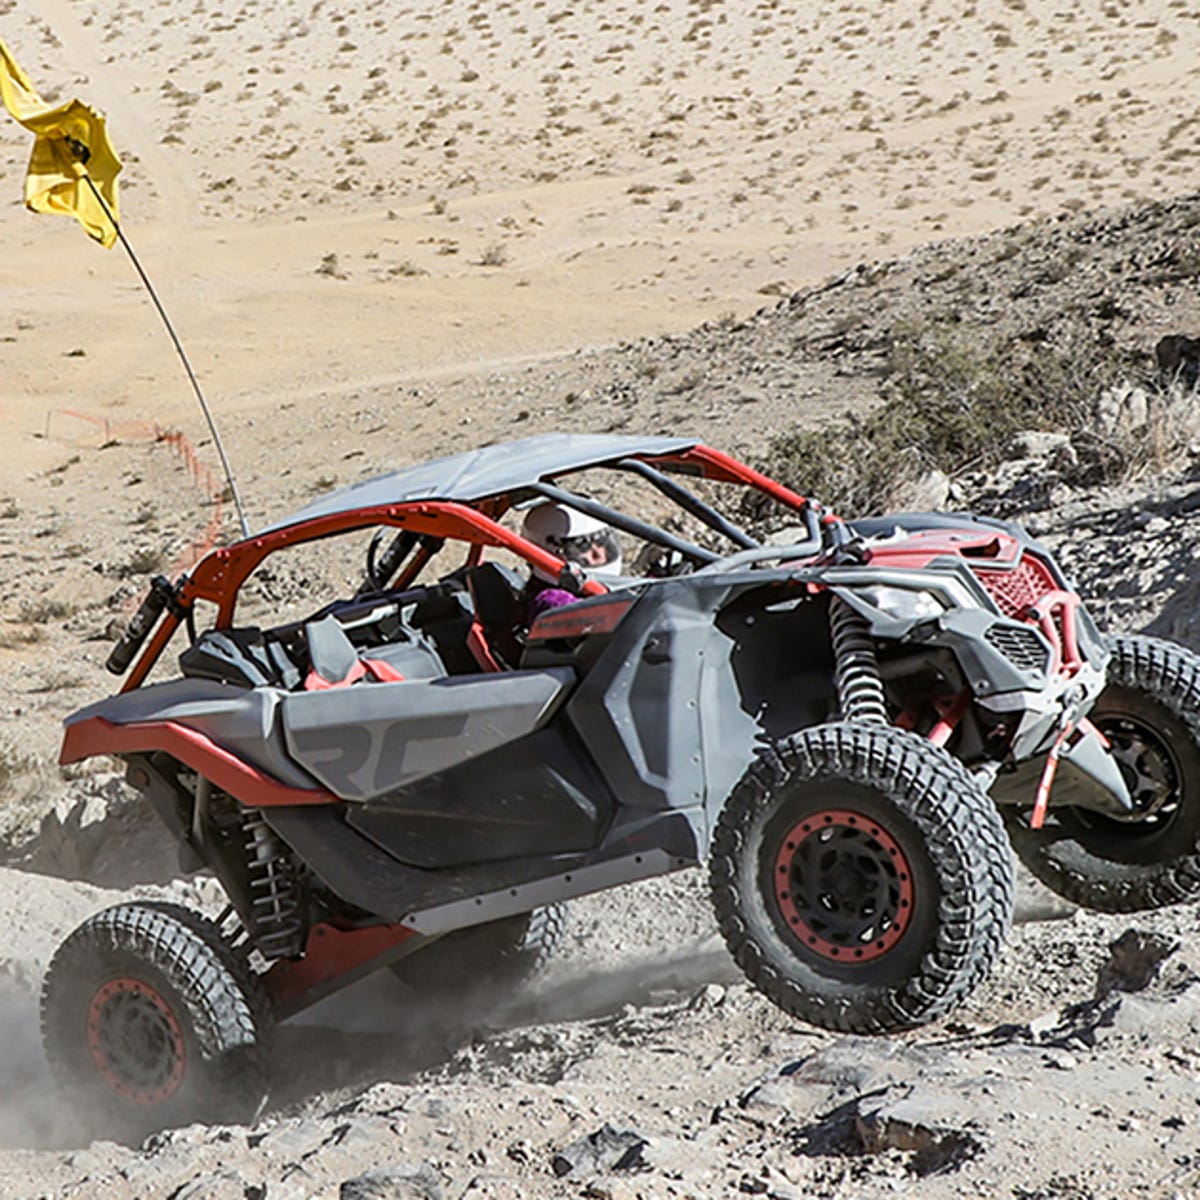 2022 Can-Am Maverick First Drive Review: Finding My Feelings - CNET